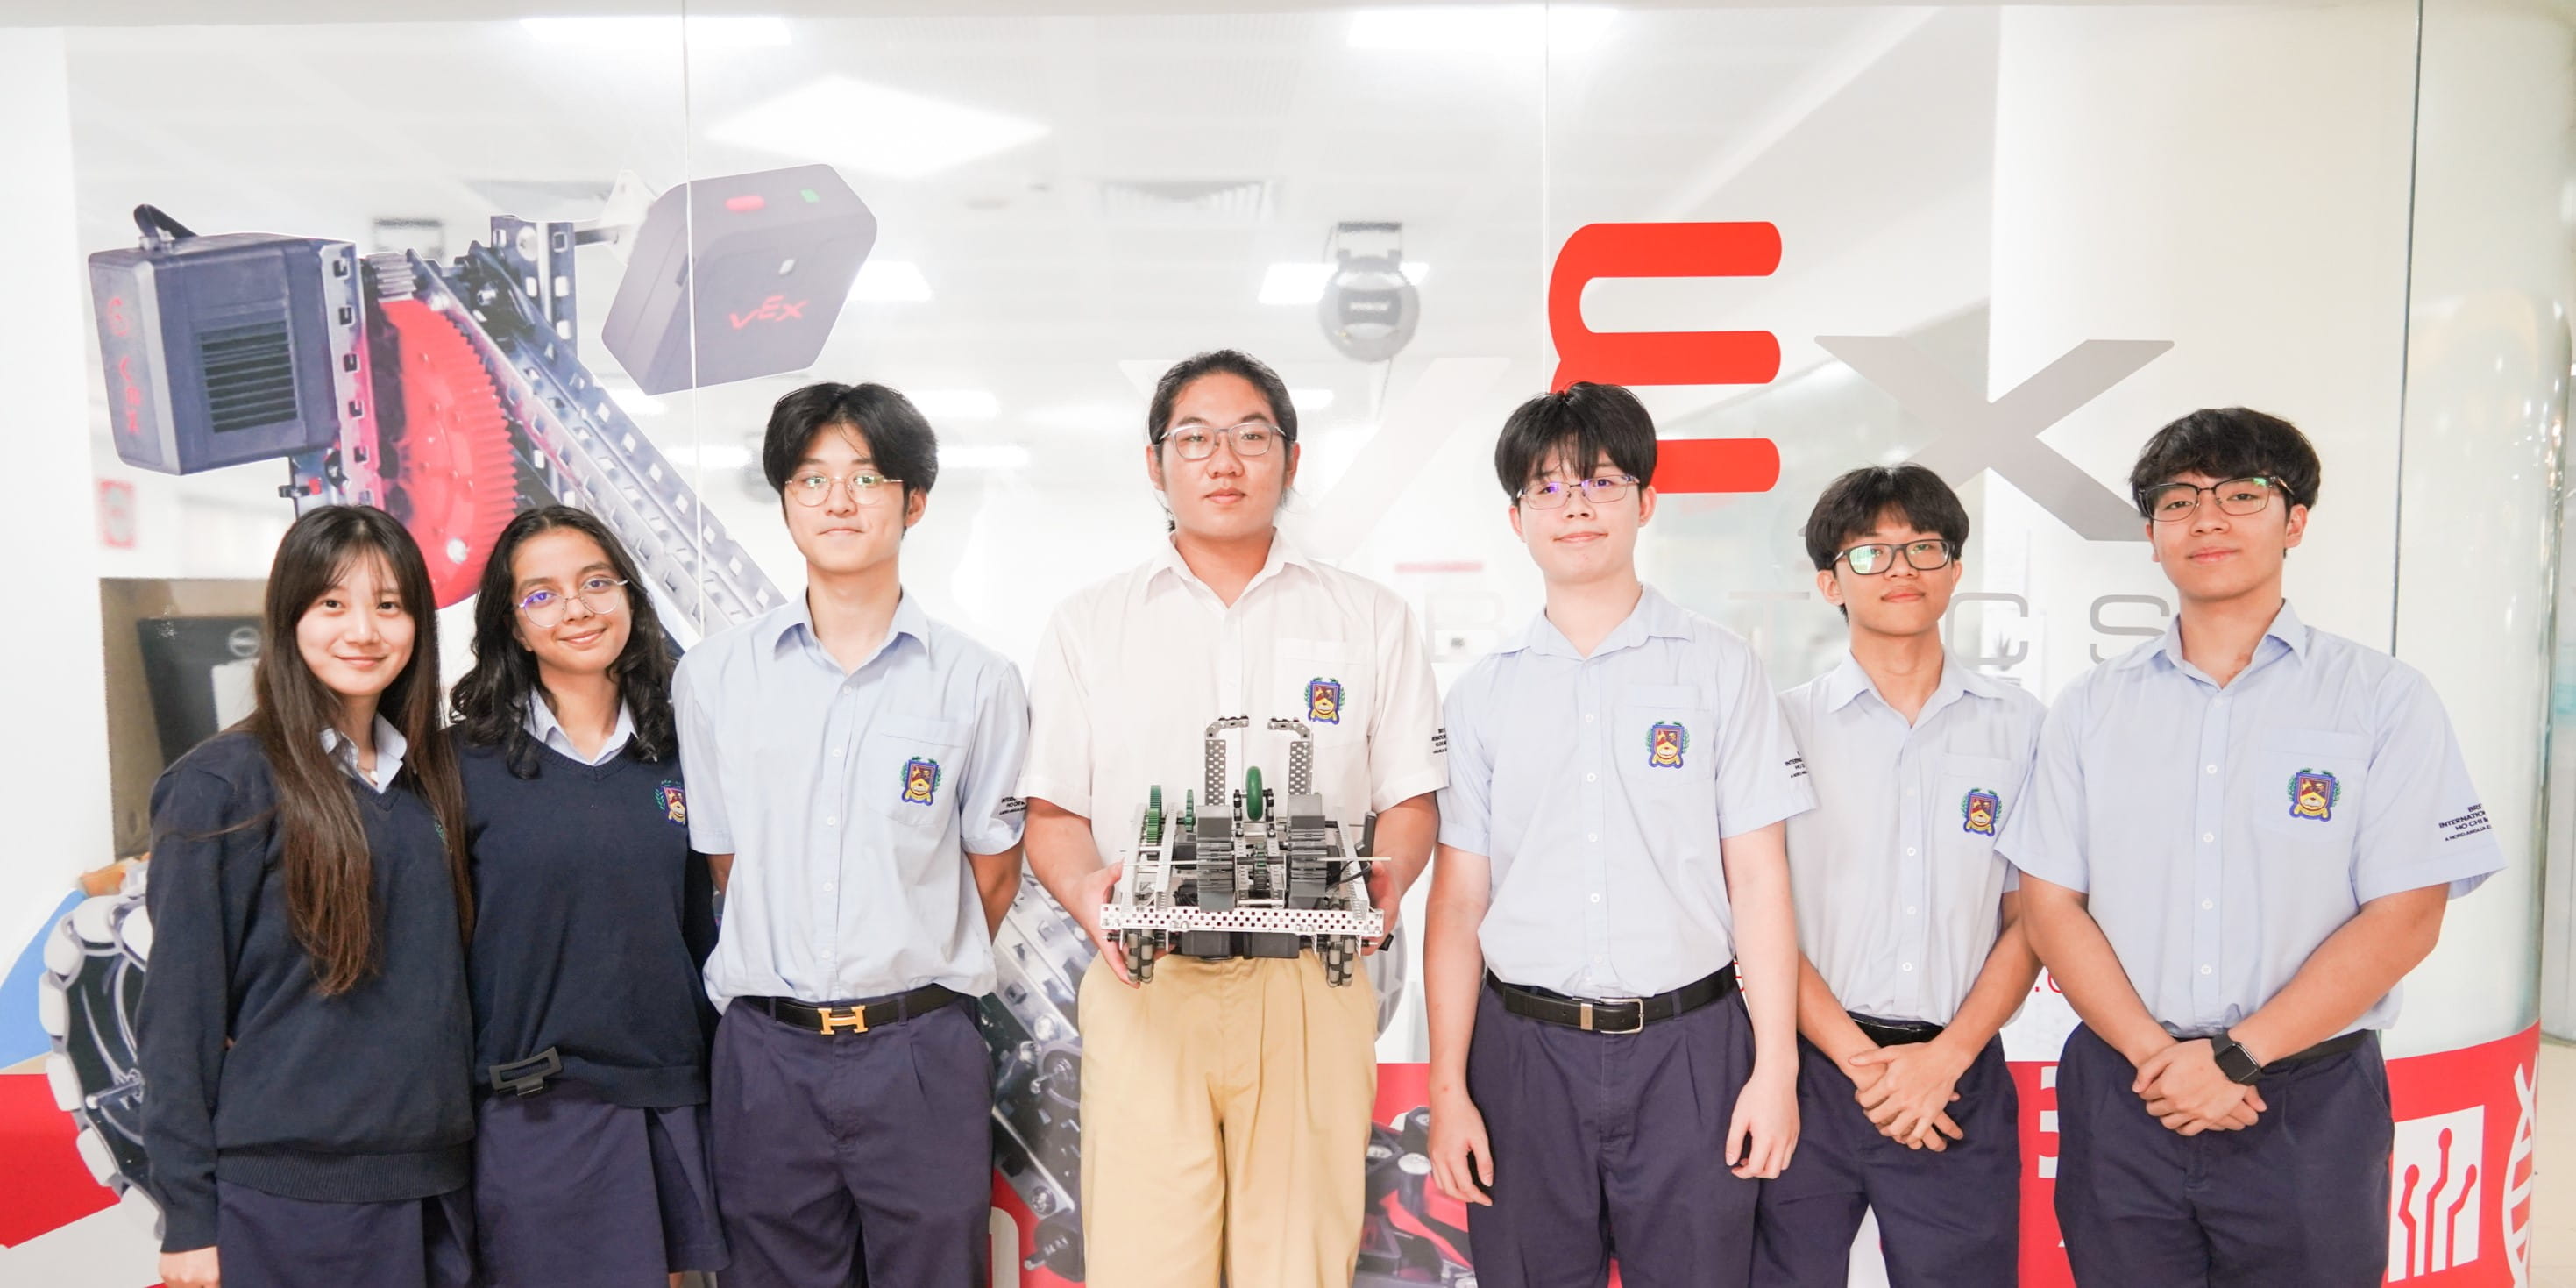 BIS HCMC robotics team build and programme two robots to compete at their first VEX Tournament - BIS HCMC robotics team build and programme two robots to compete at their first VEX Tournament